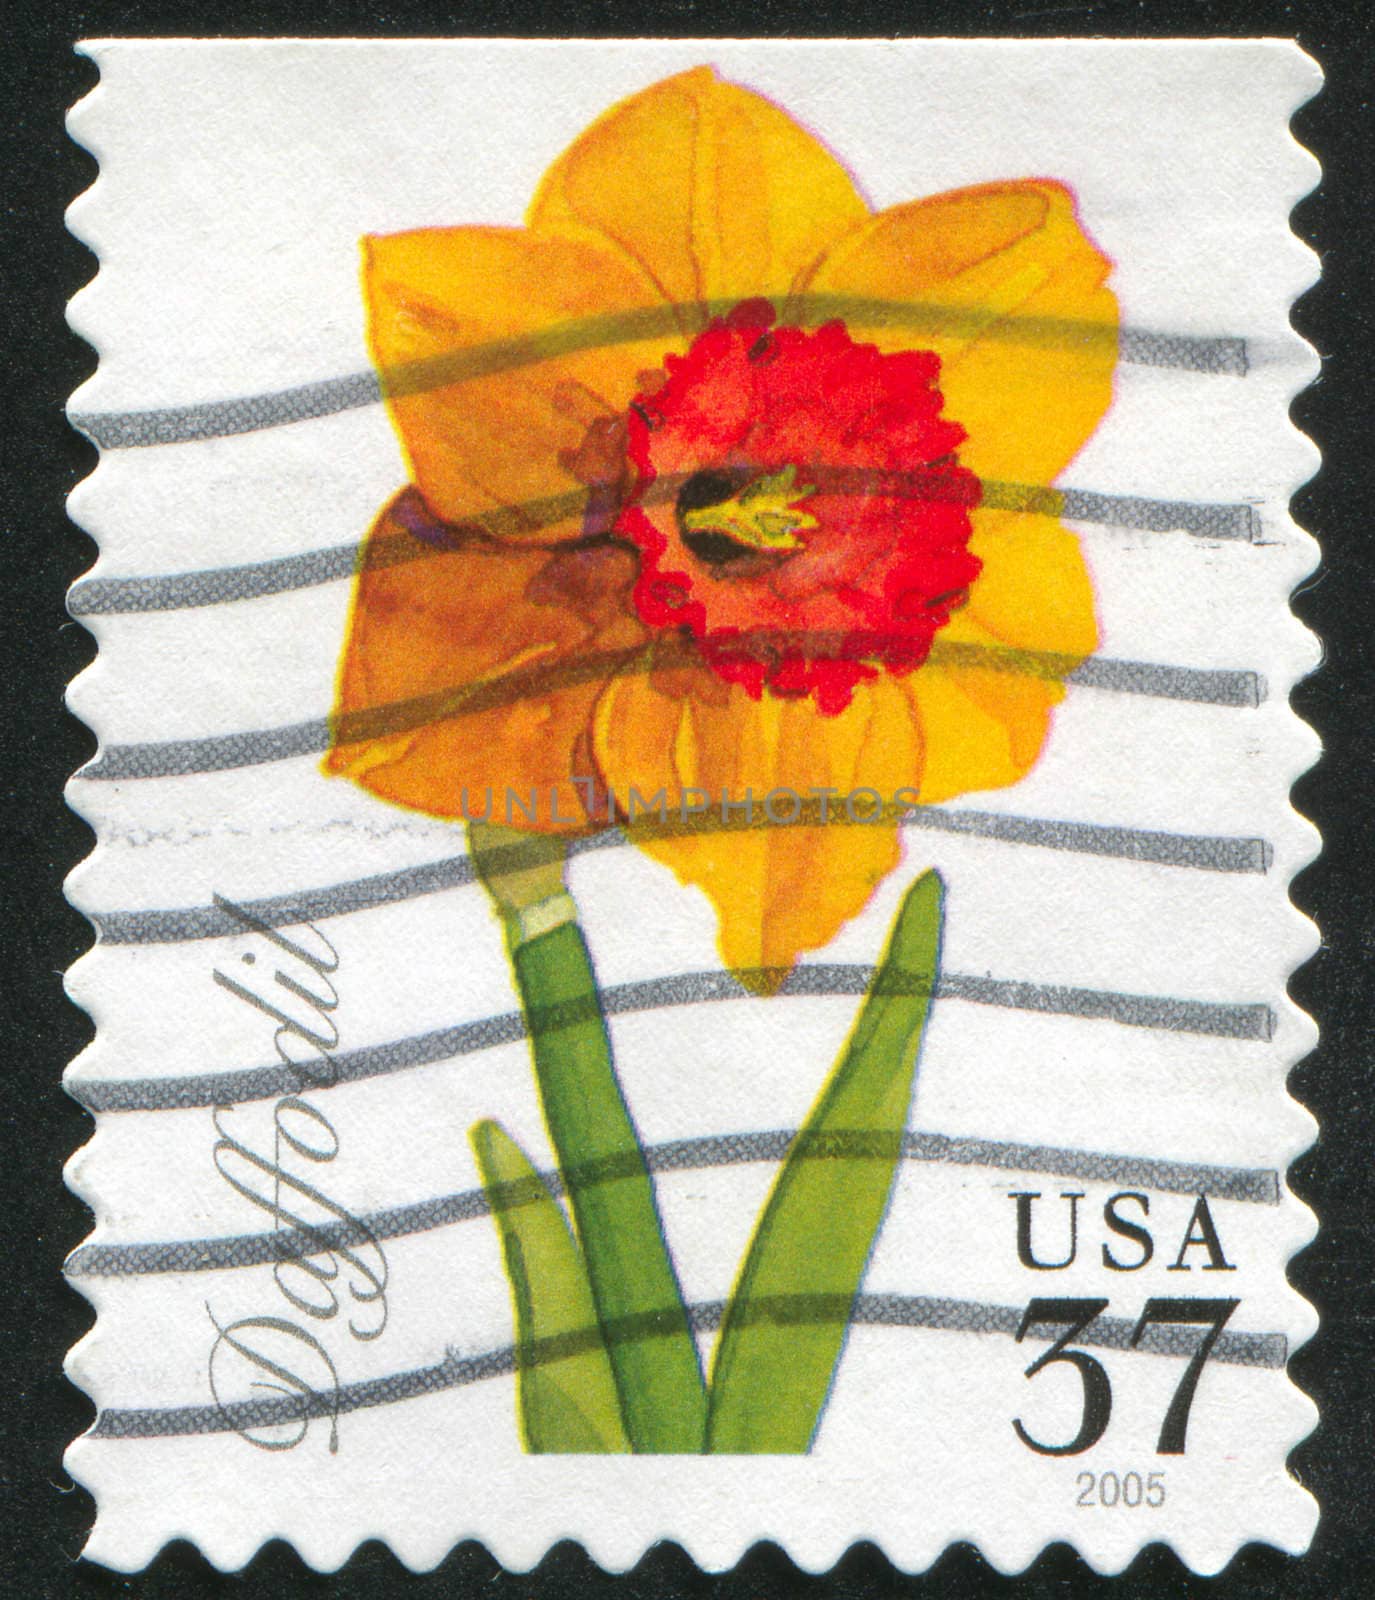 UNITED STATES - CIRCA 1999: stamp printed by United states, shows Daffodil, circa 1999